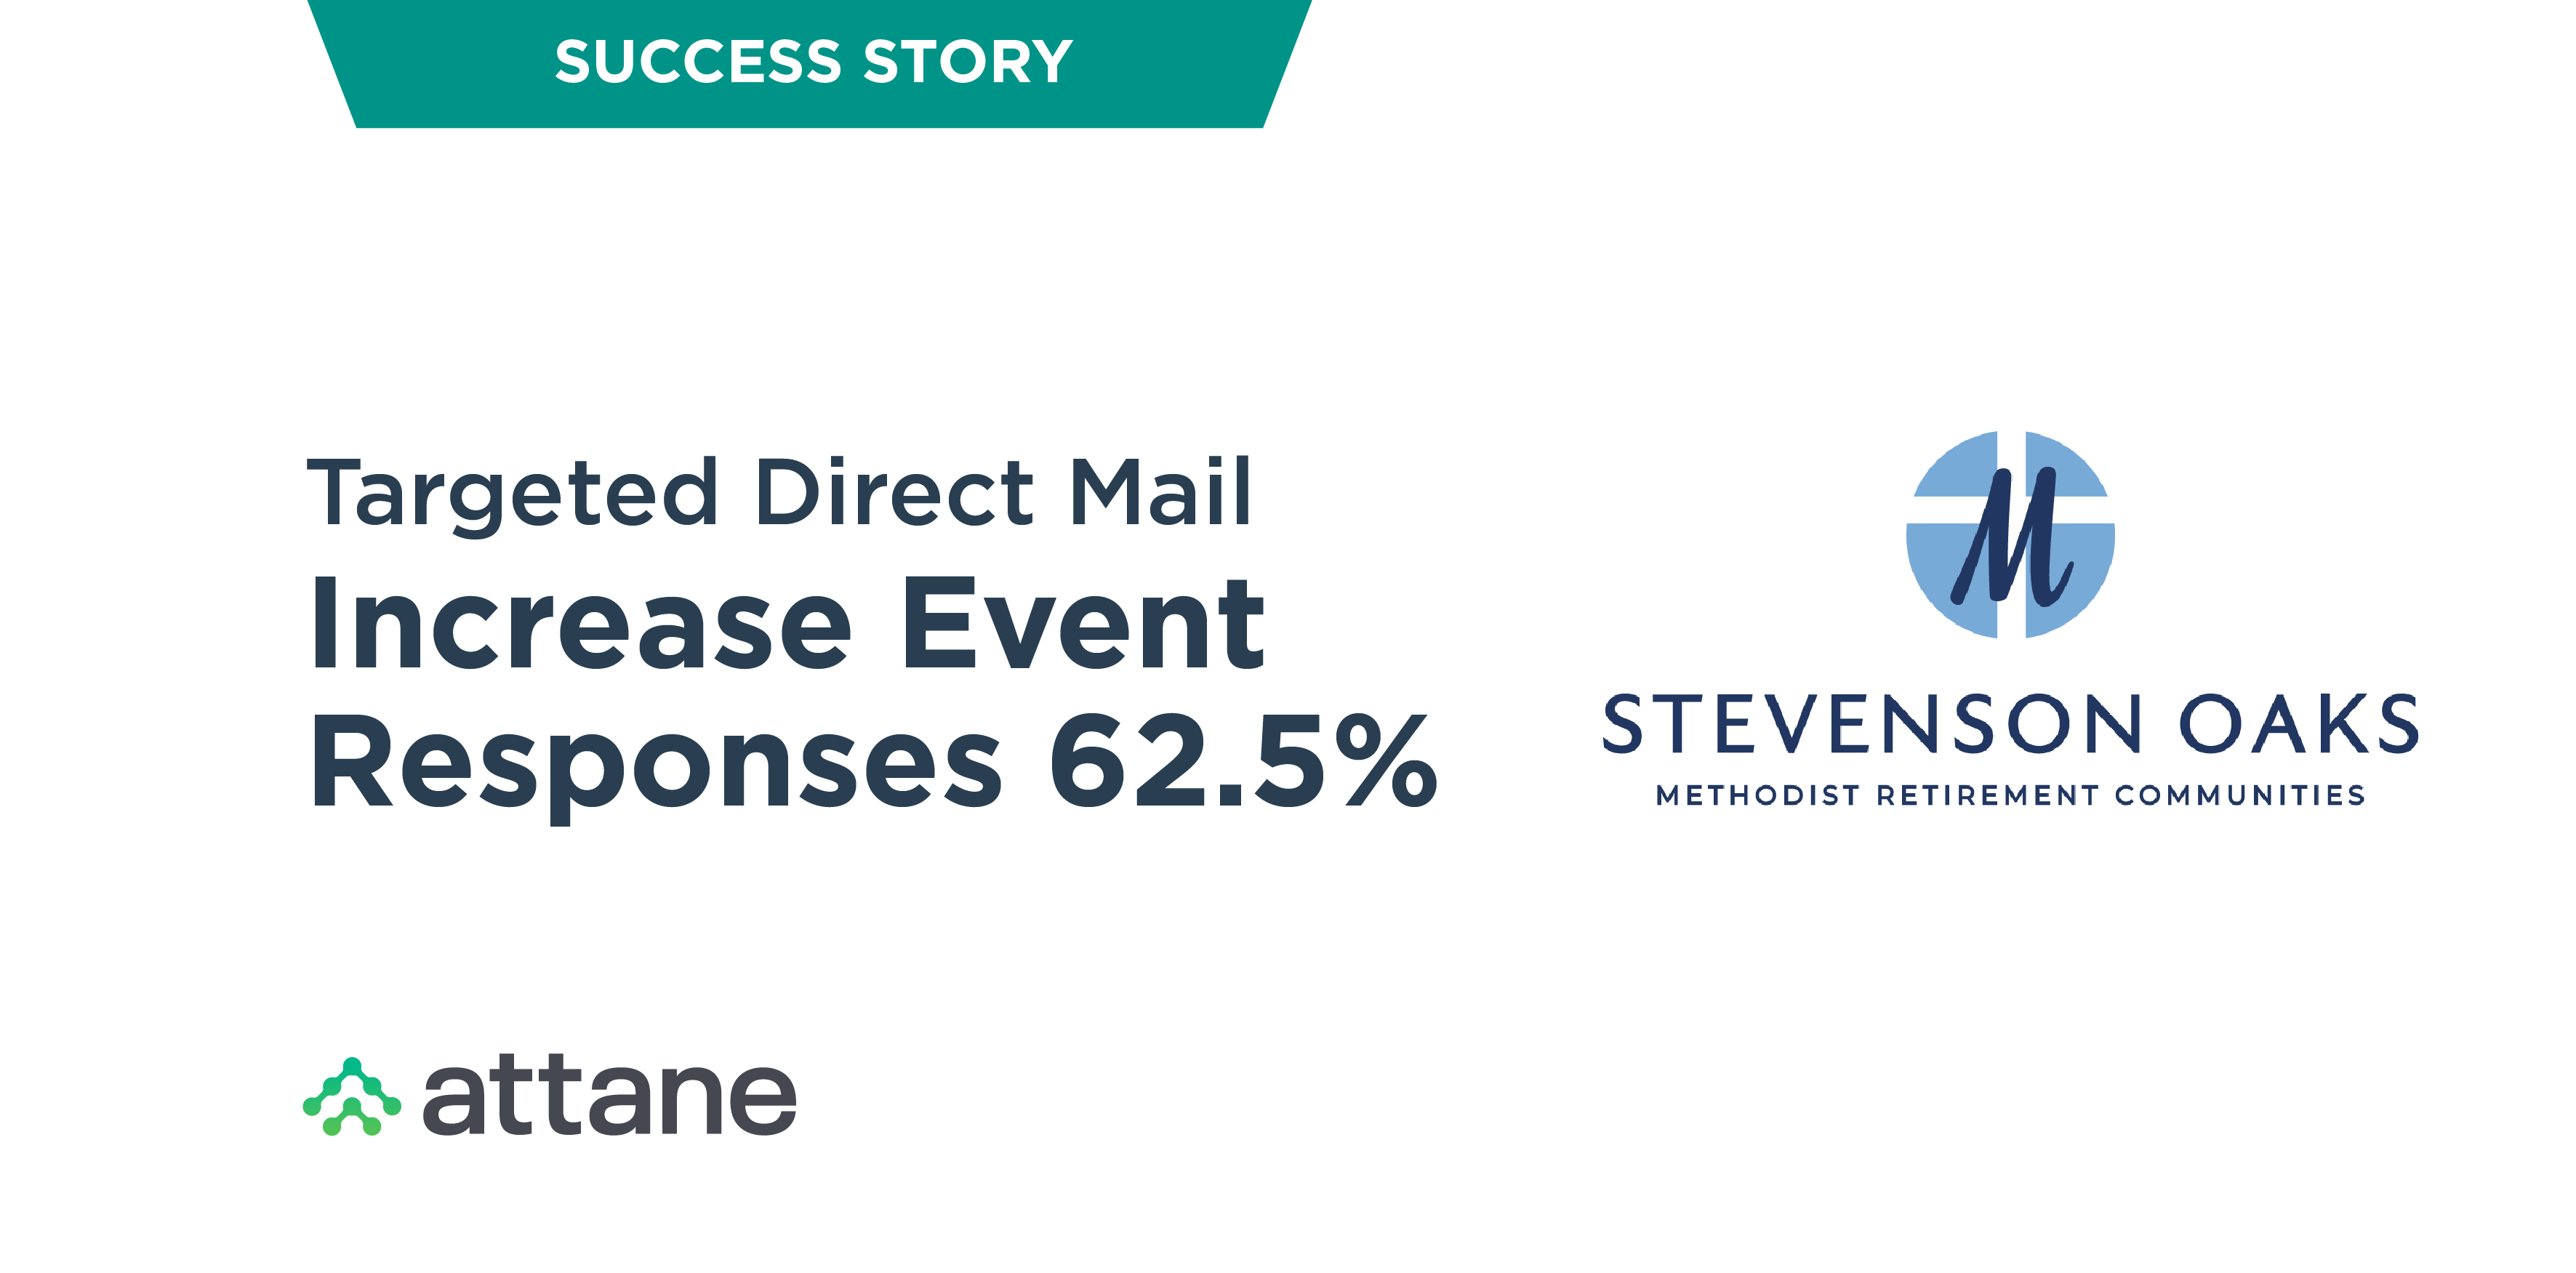 Targeted Direct Mail Increases Event Responses 62.5%